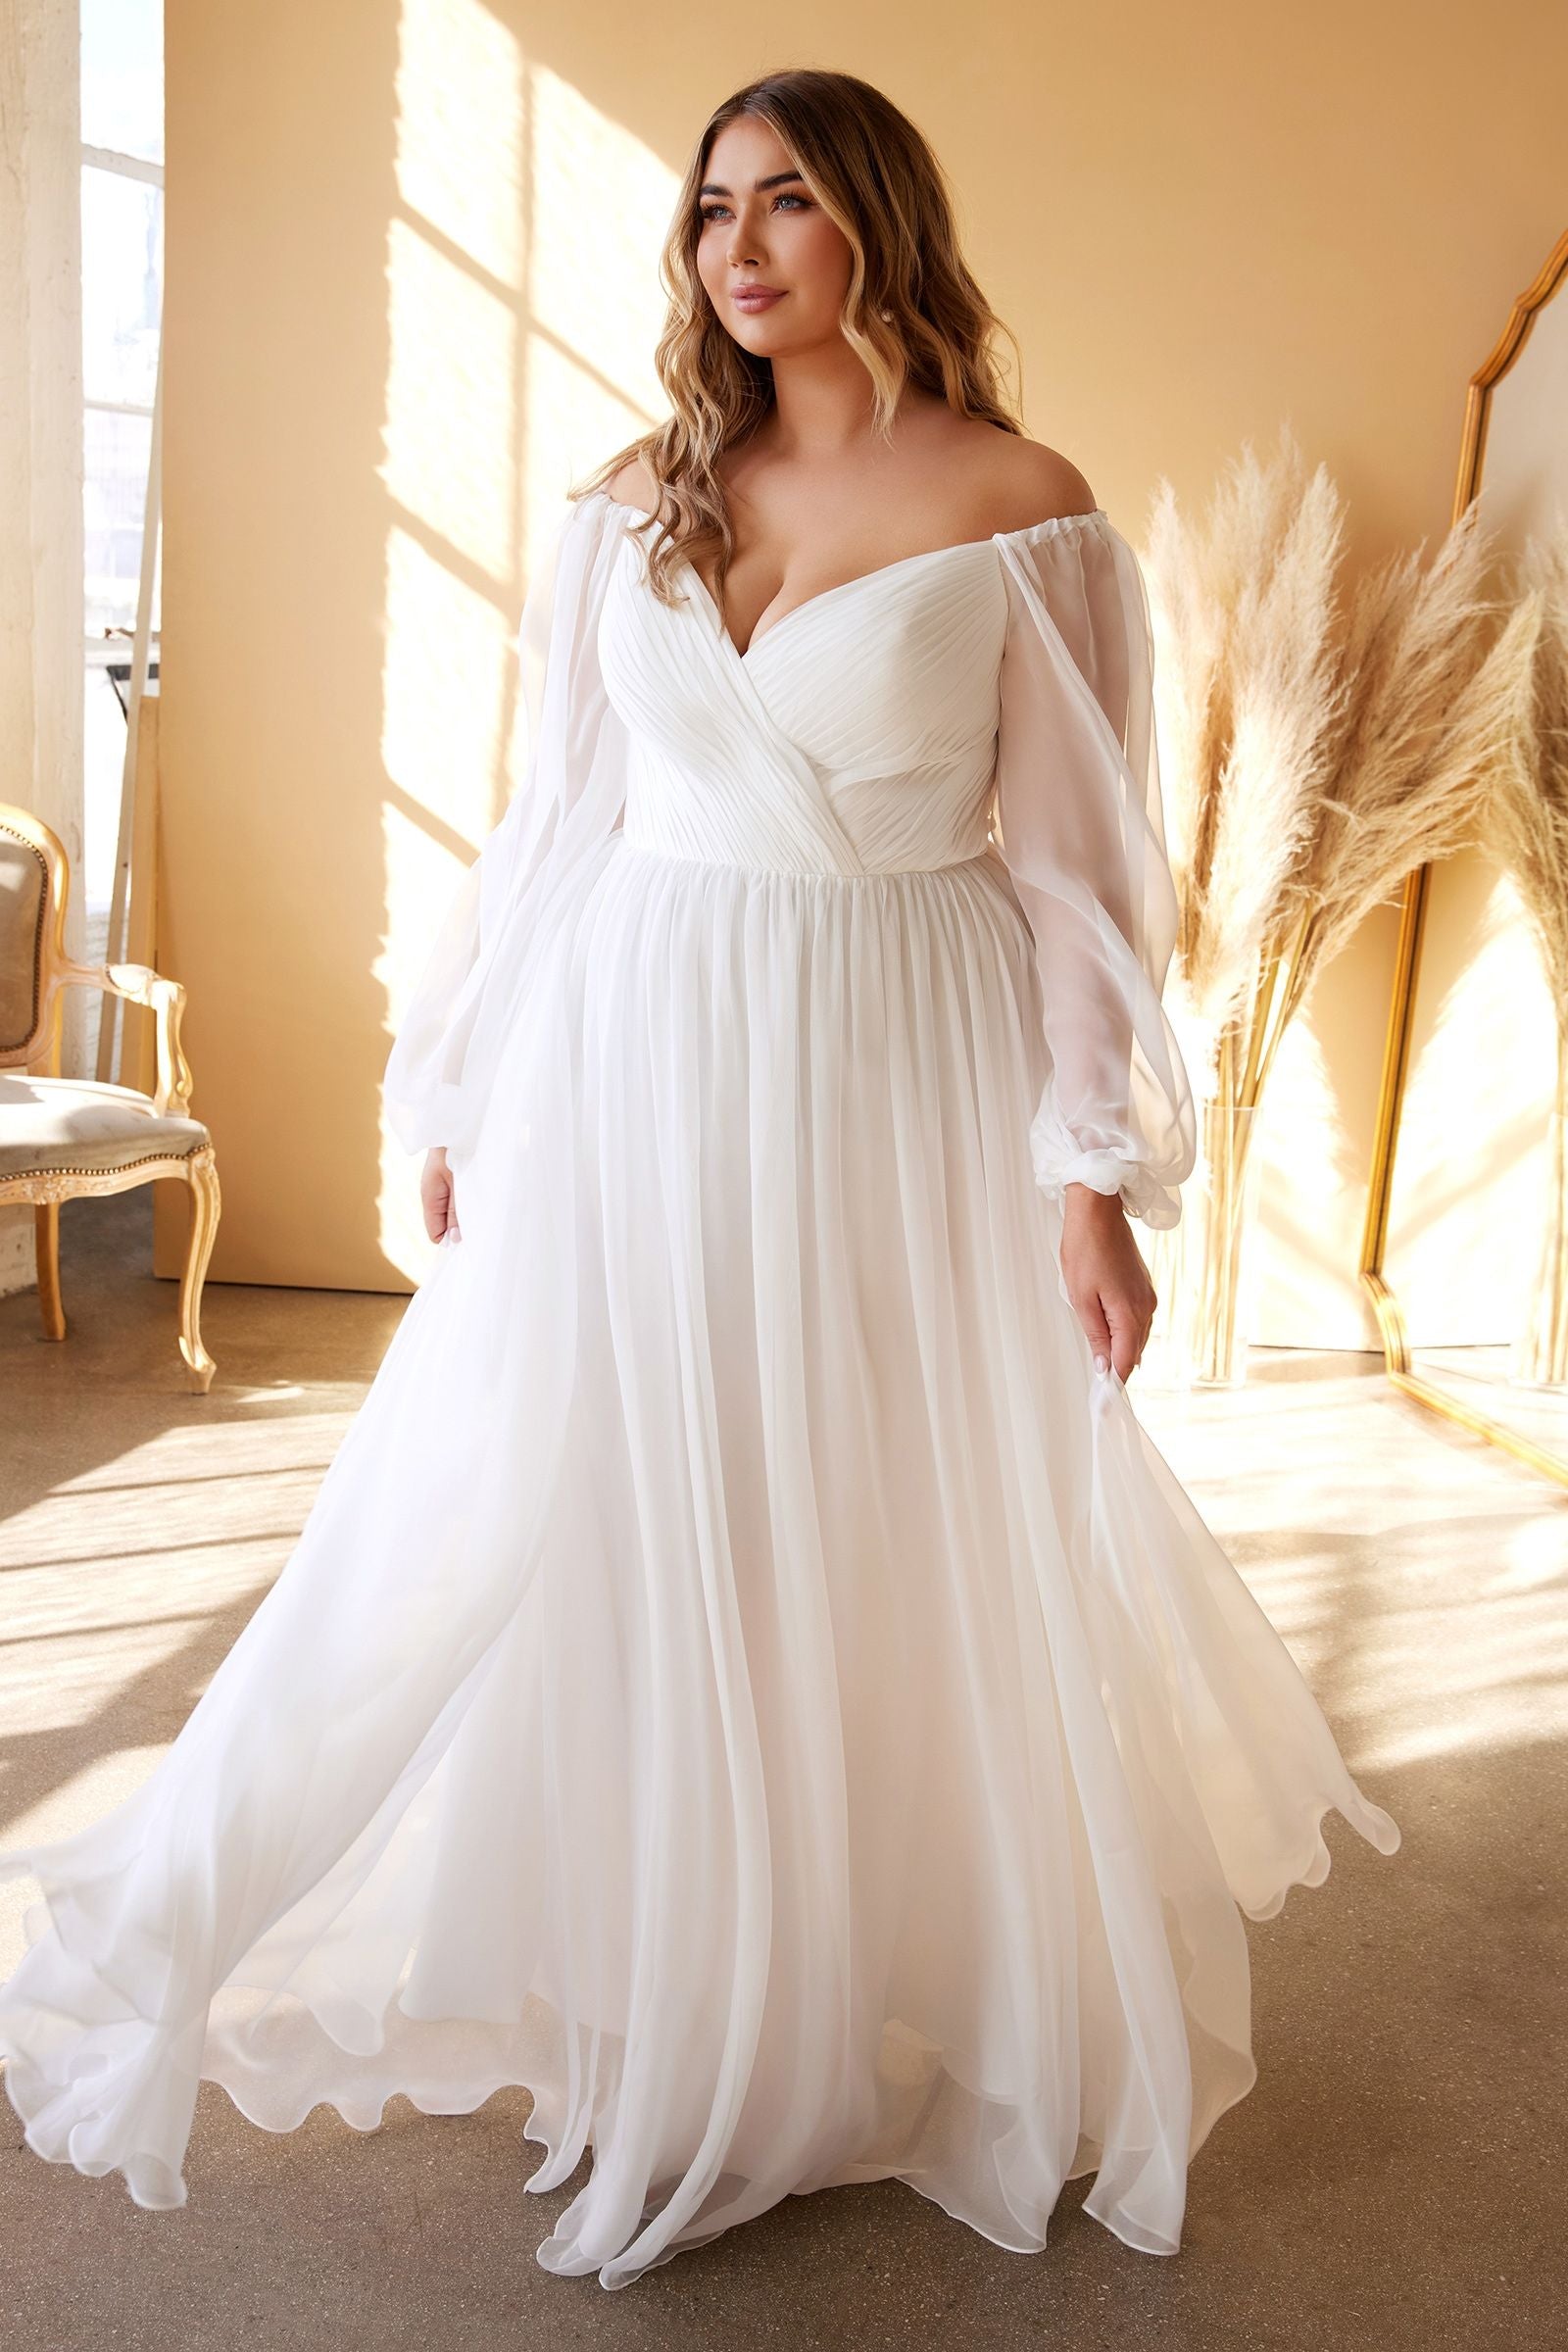 Graceful gown with pleated bodice, flowing blouson sleeves, and soft A-line skirt